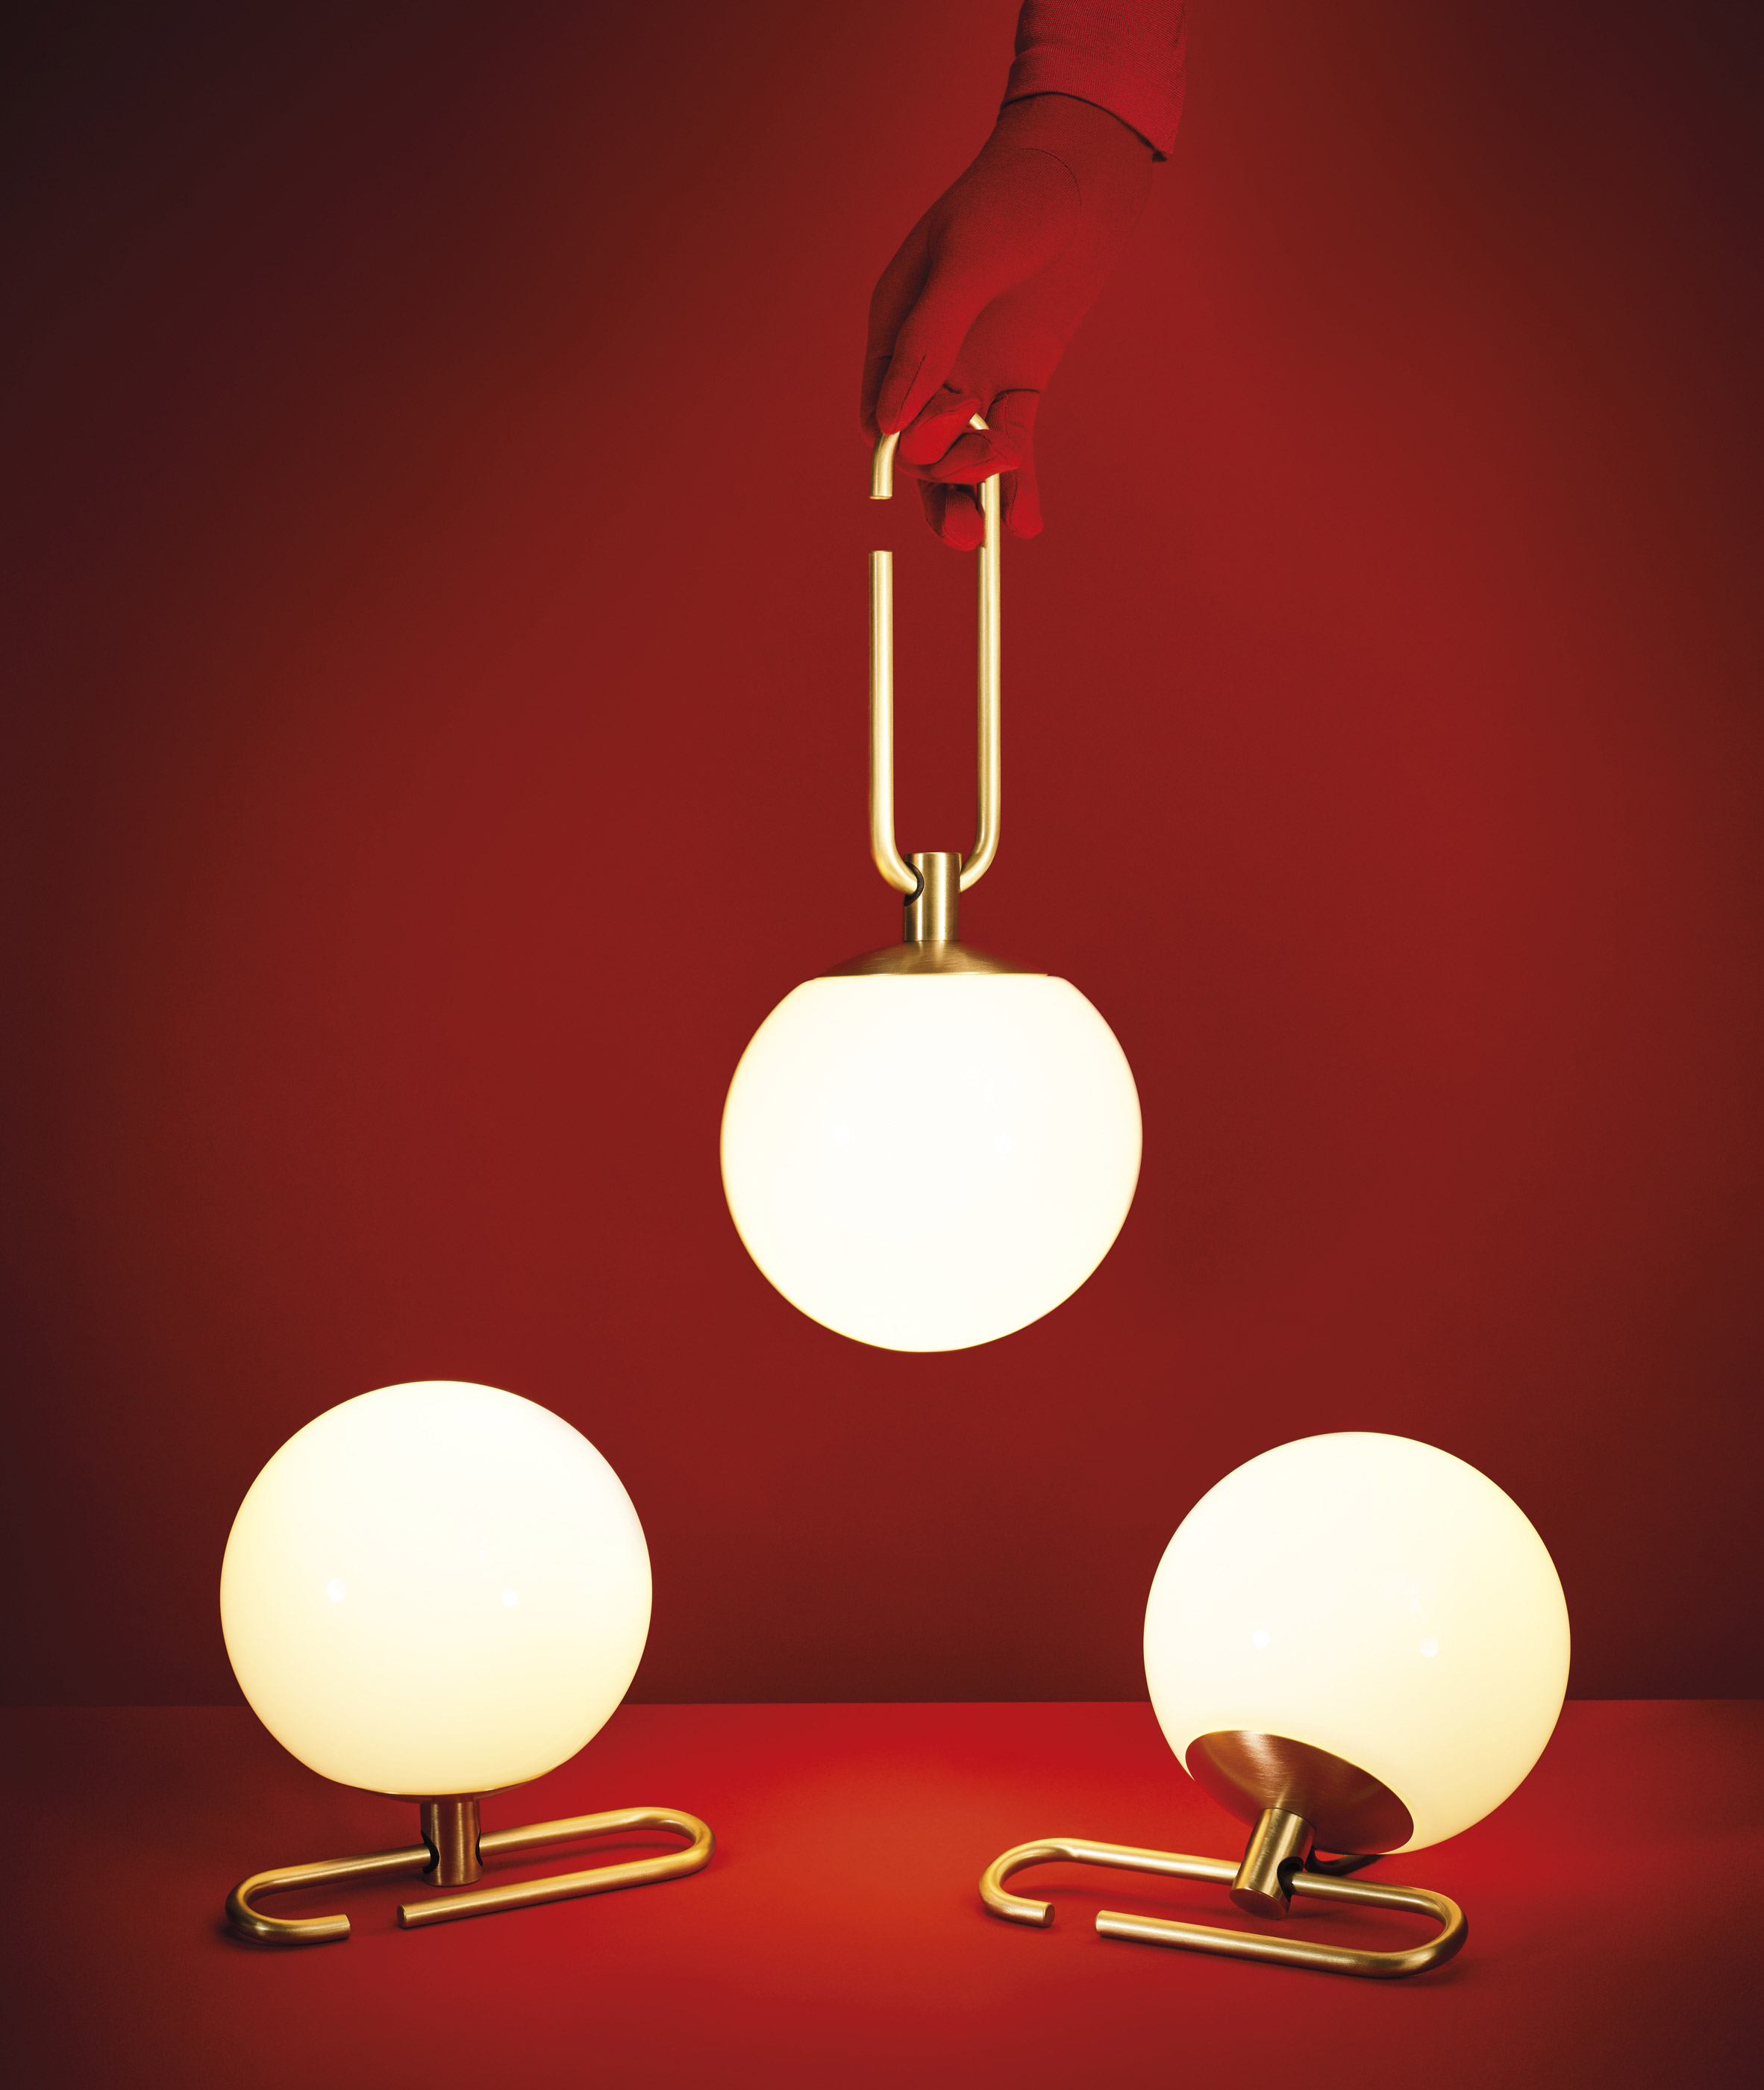 Neri&Hu's lantern-inspired lights sit on or hang from adjustable brass rings